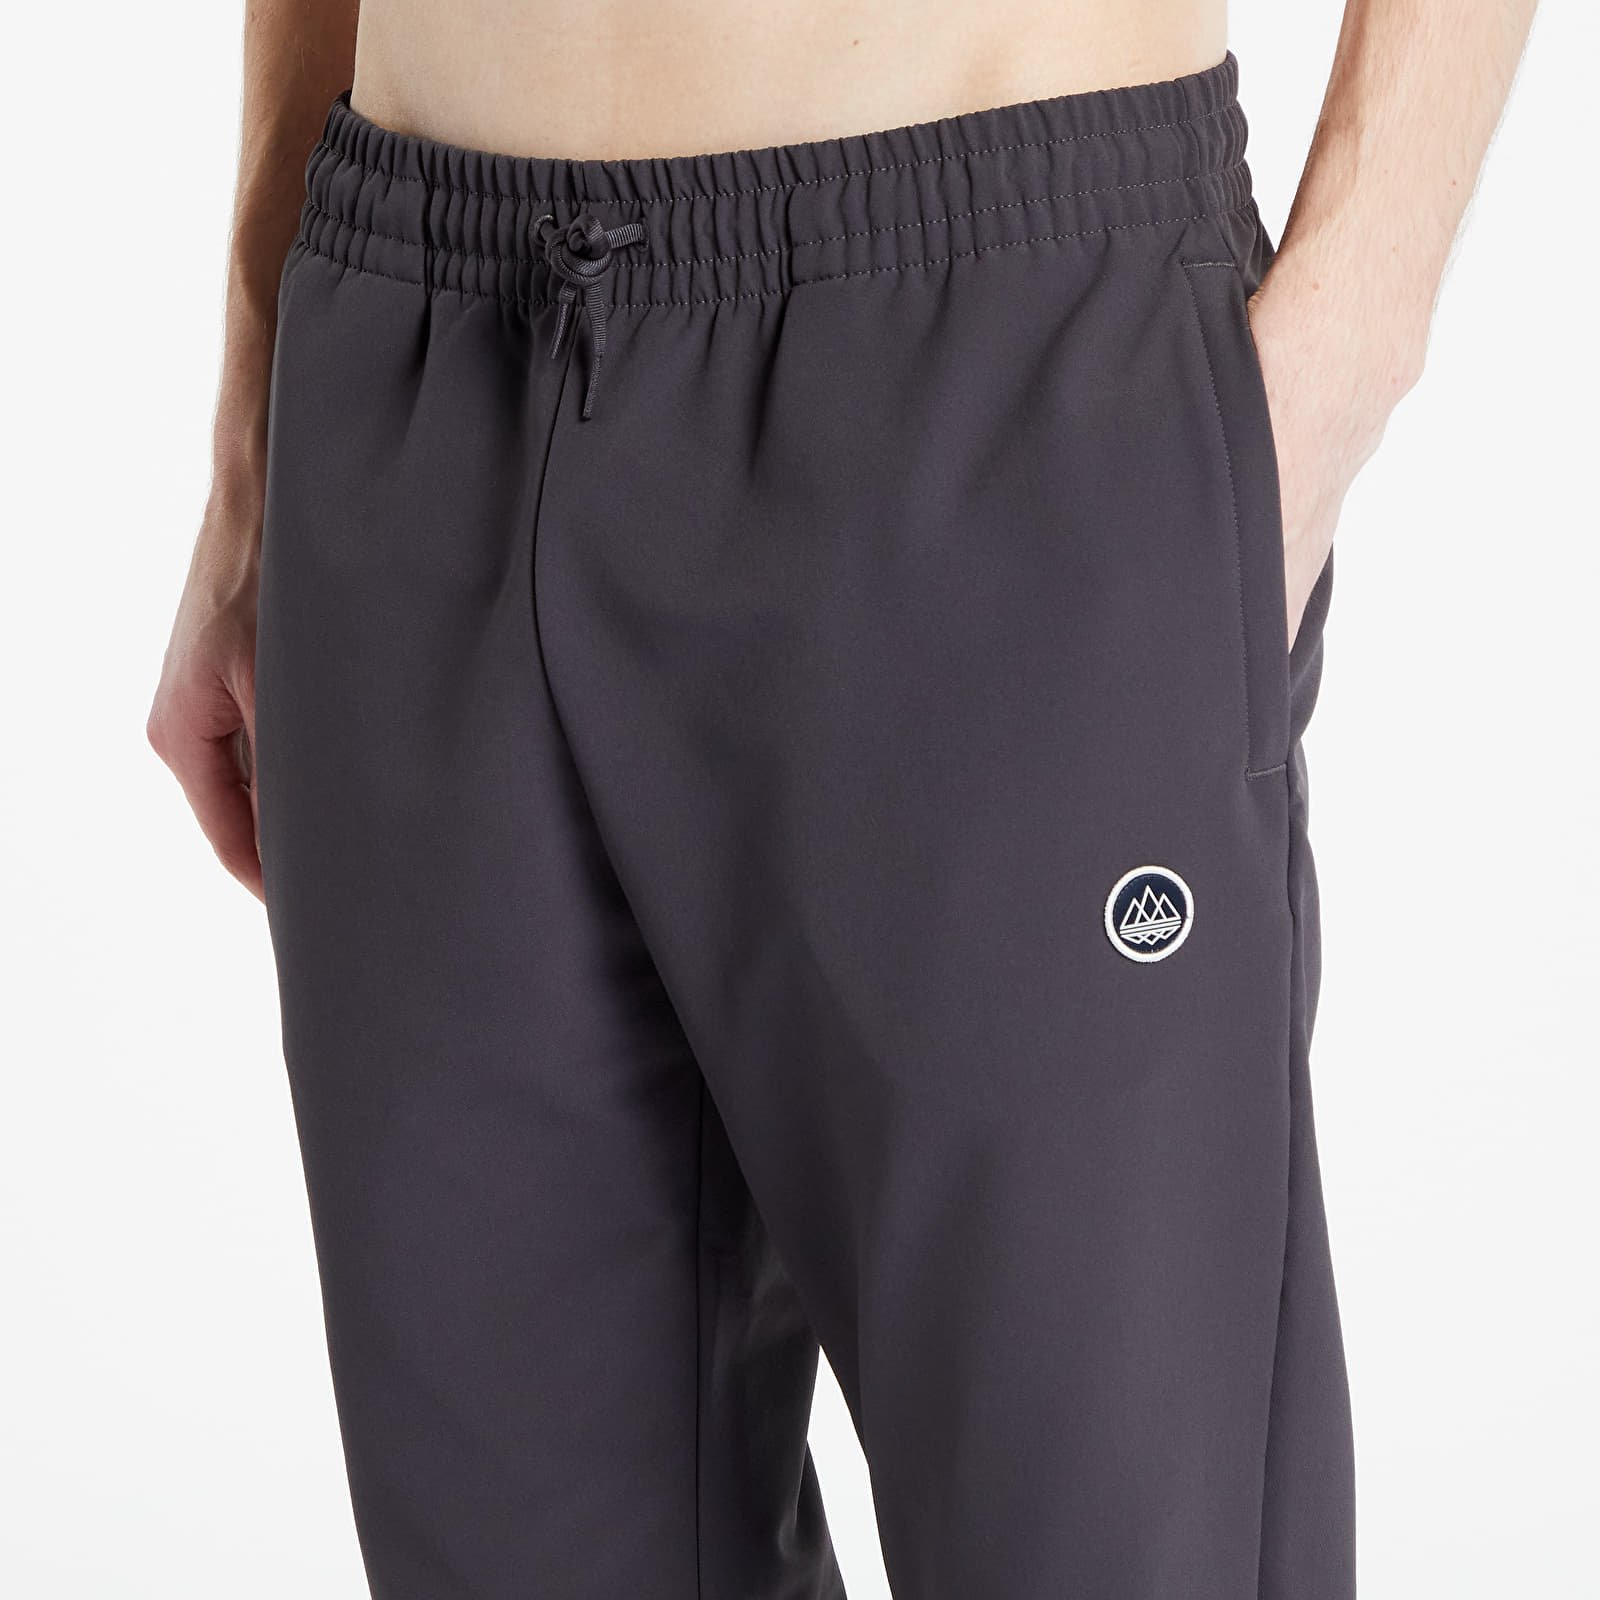 Suddell Tracksuit Bottoms